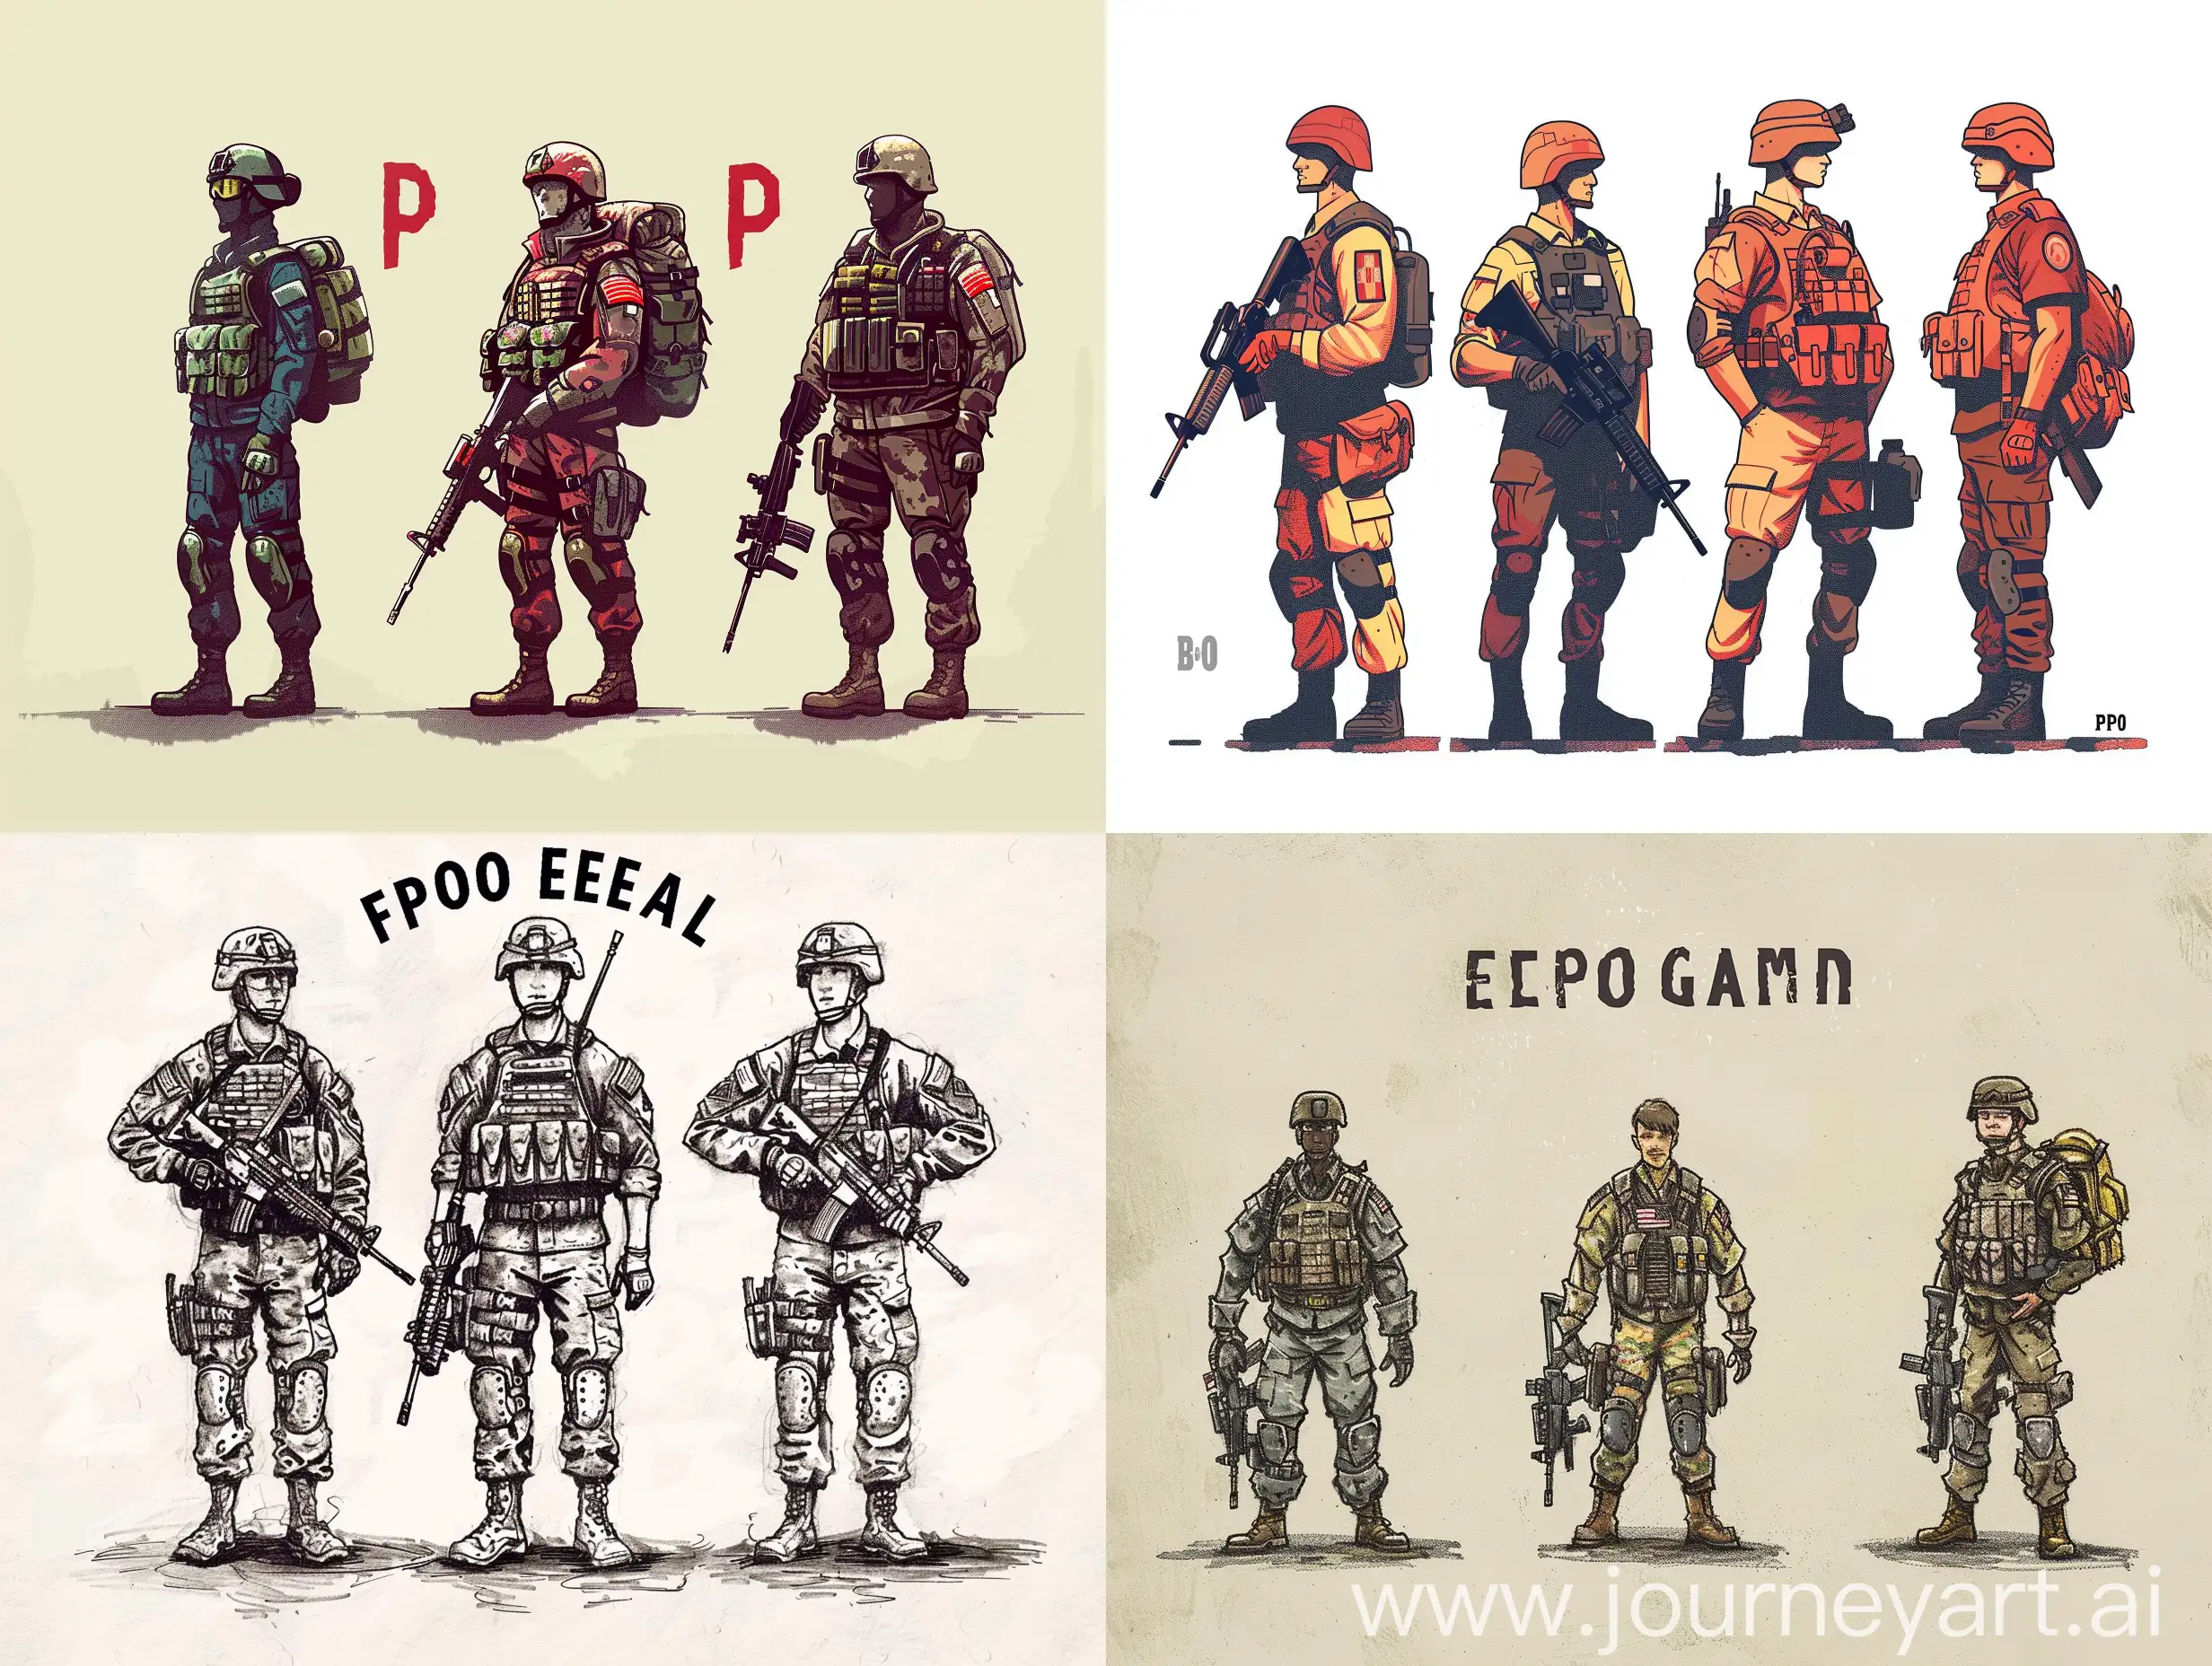 Draw it what three echelons of an army would look like (namely militias, regular army and B.P.O  operatives) 